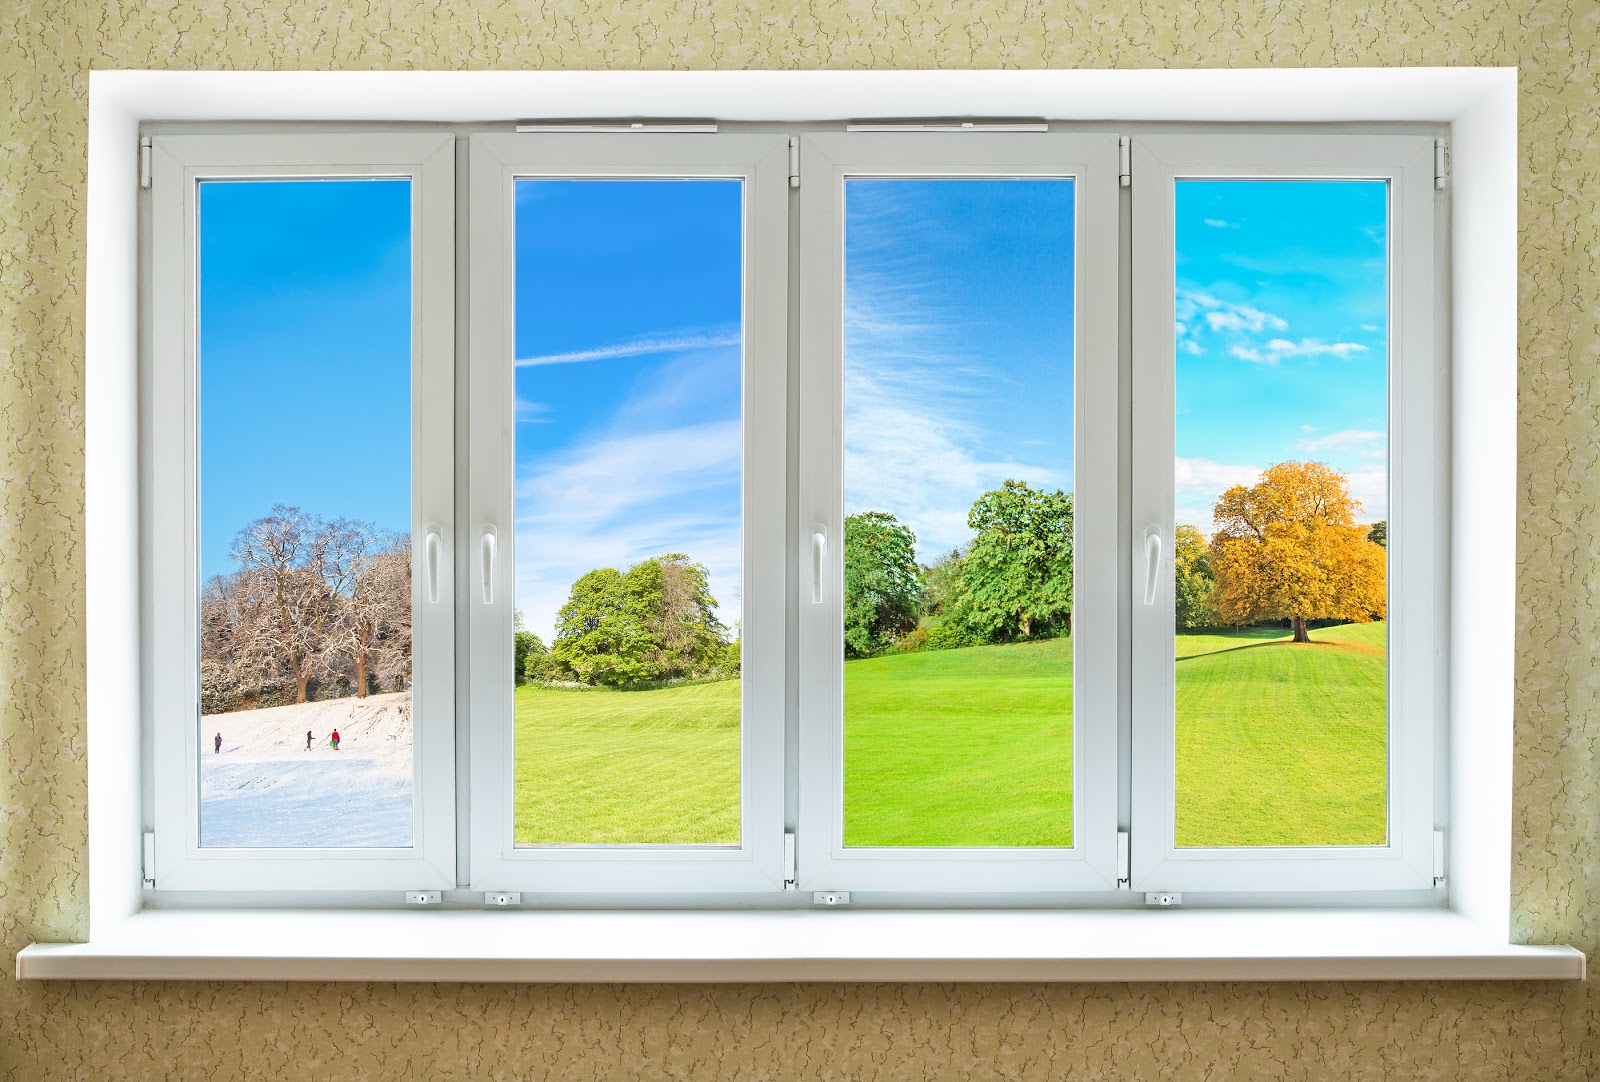 Benefits of Spring Window Replacement